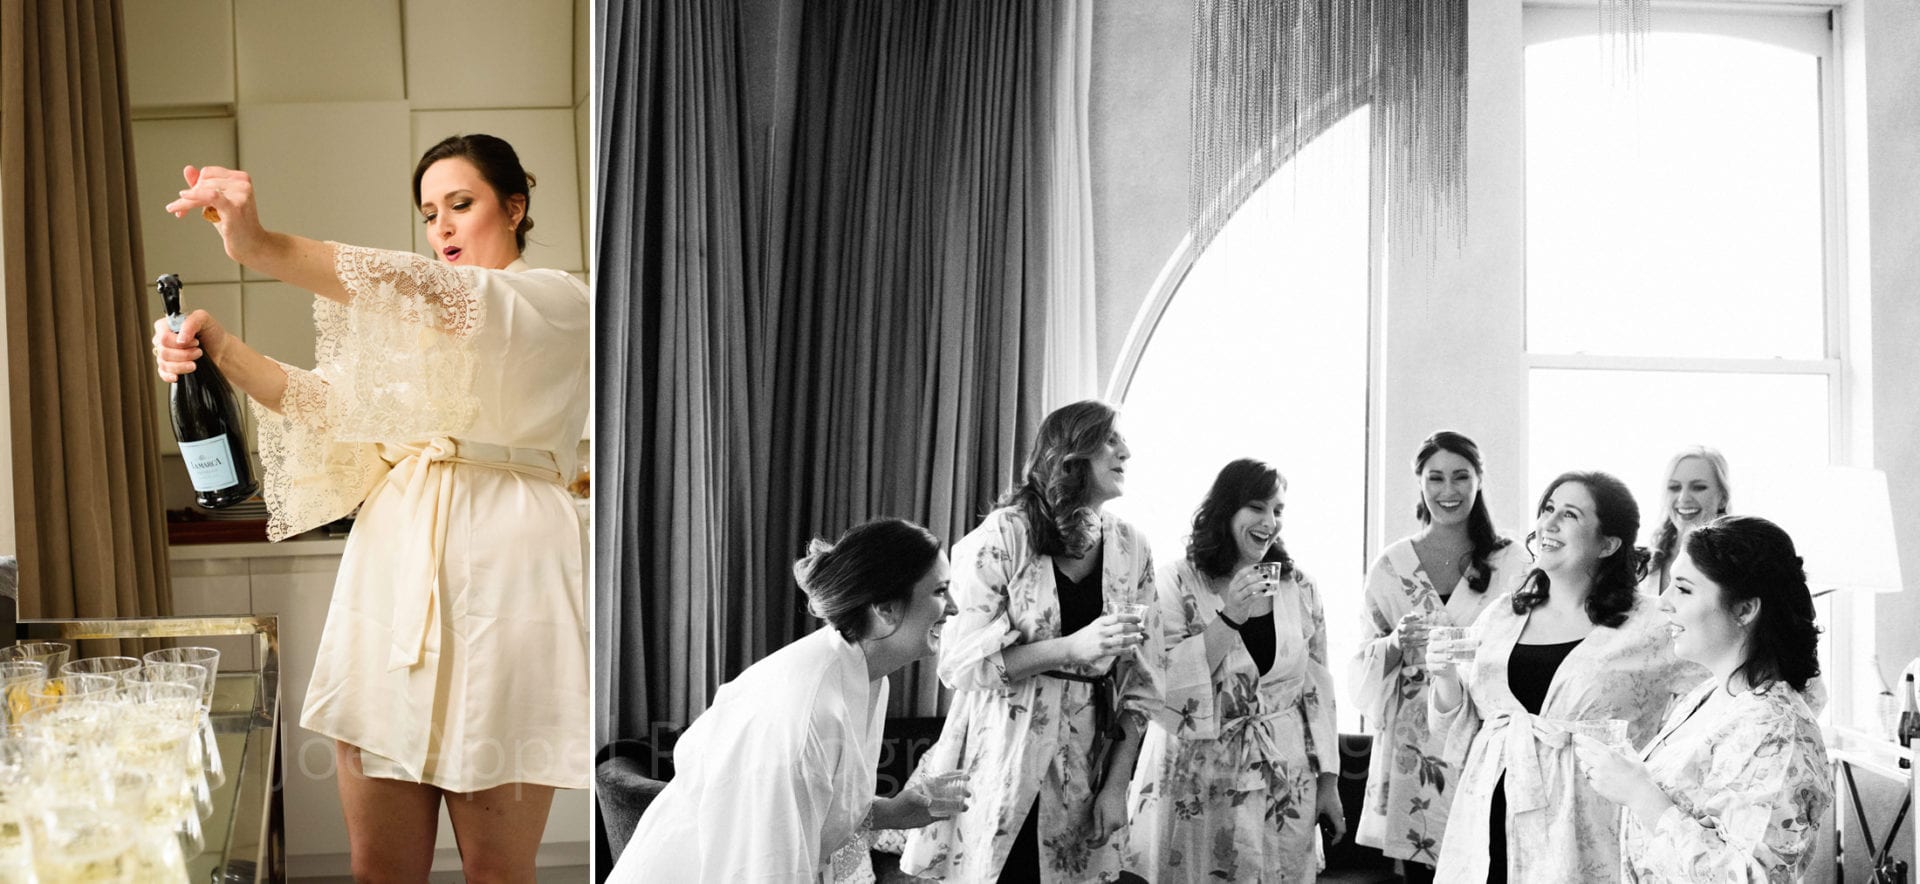 Two photos: The first shows a bride in her dressing gown popping open a bottle of champagne in her outstretched arms. The second one shows a group of seven women in dressing gowns laughing as they hold plastic glasses filled with champagne in front of a large window.